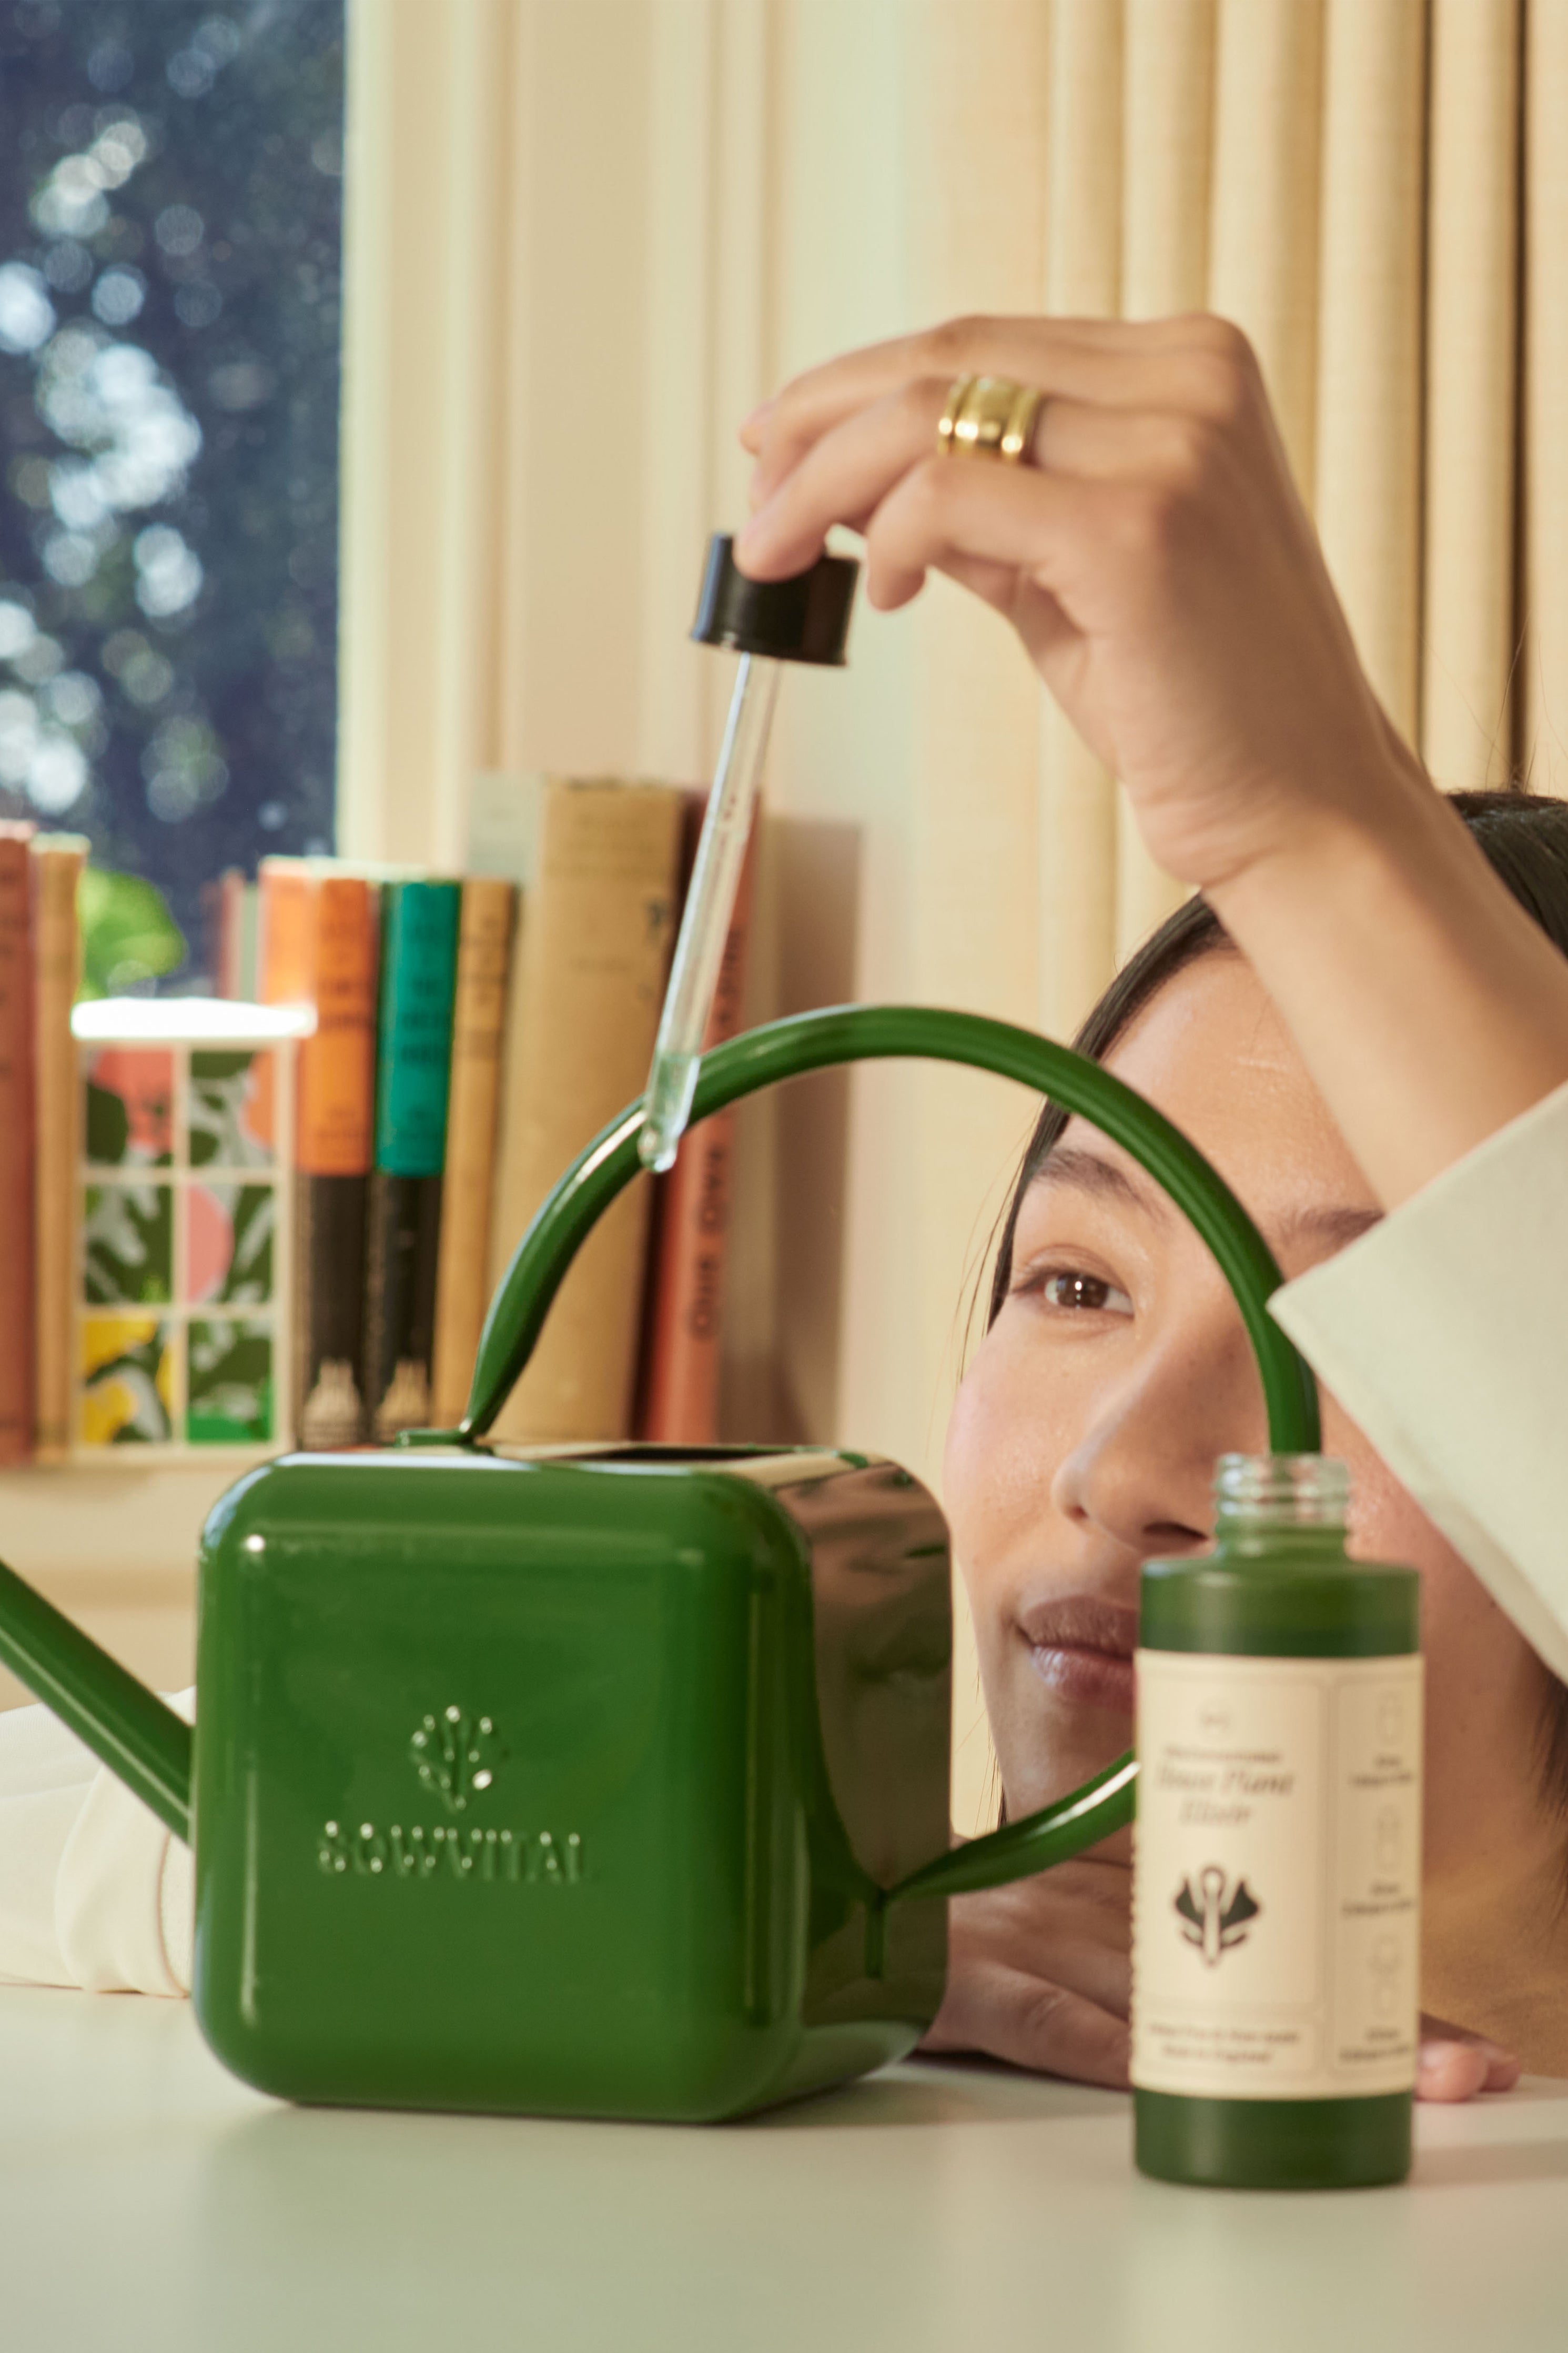 A female model dripped the house plant elixir into the Sowvital green watering can.